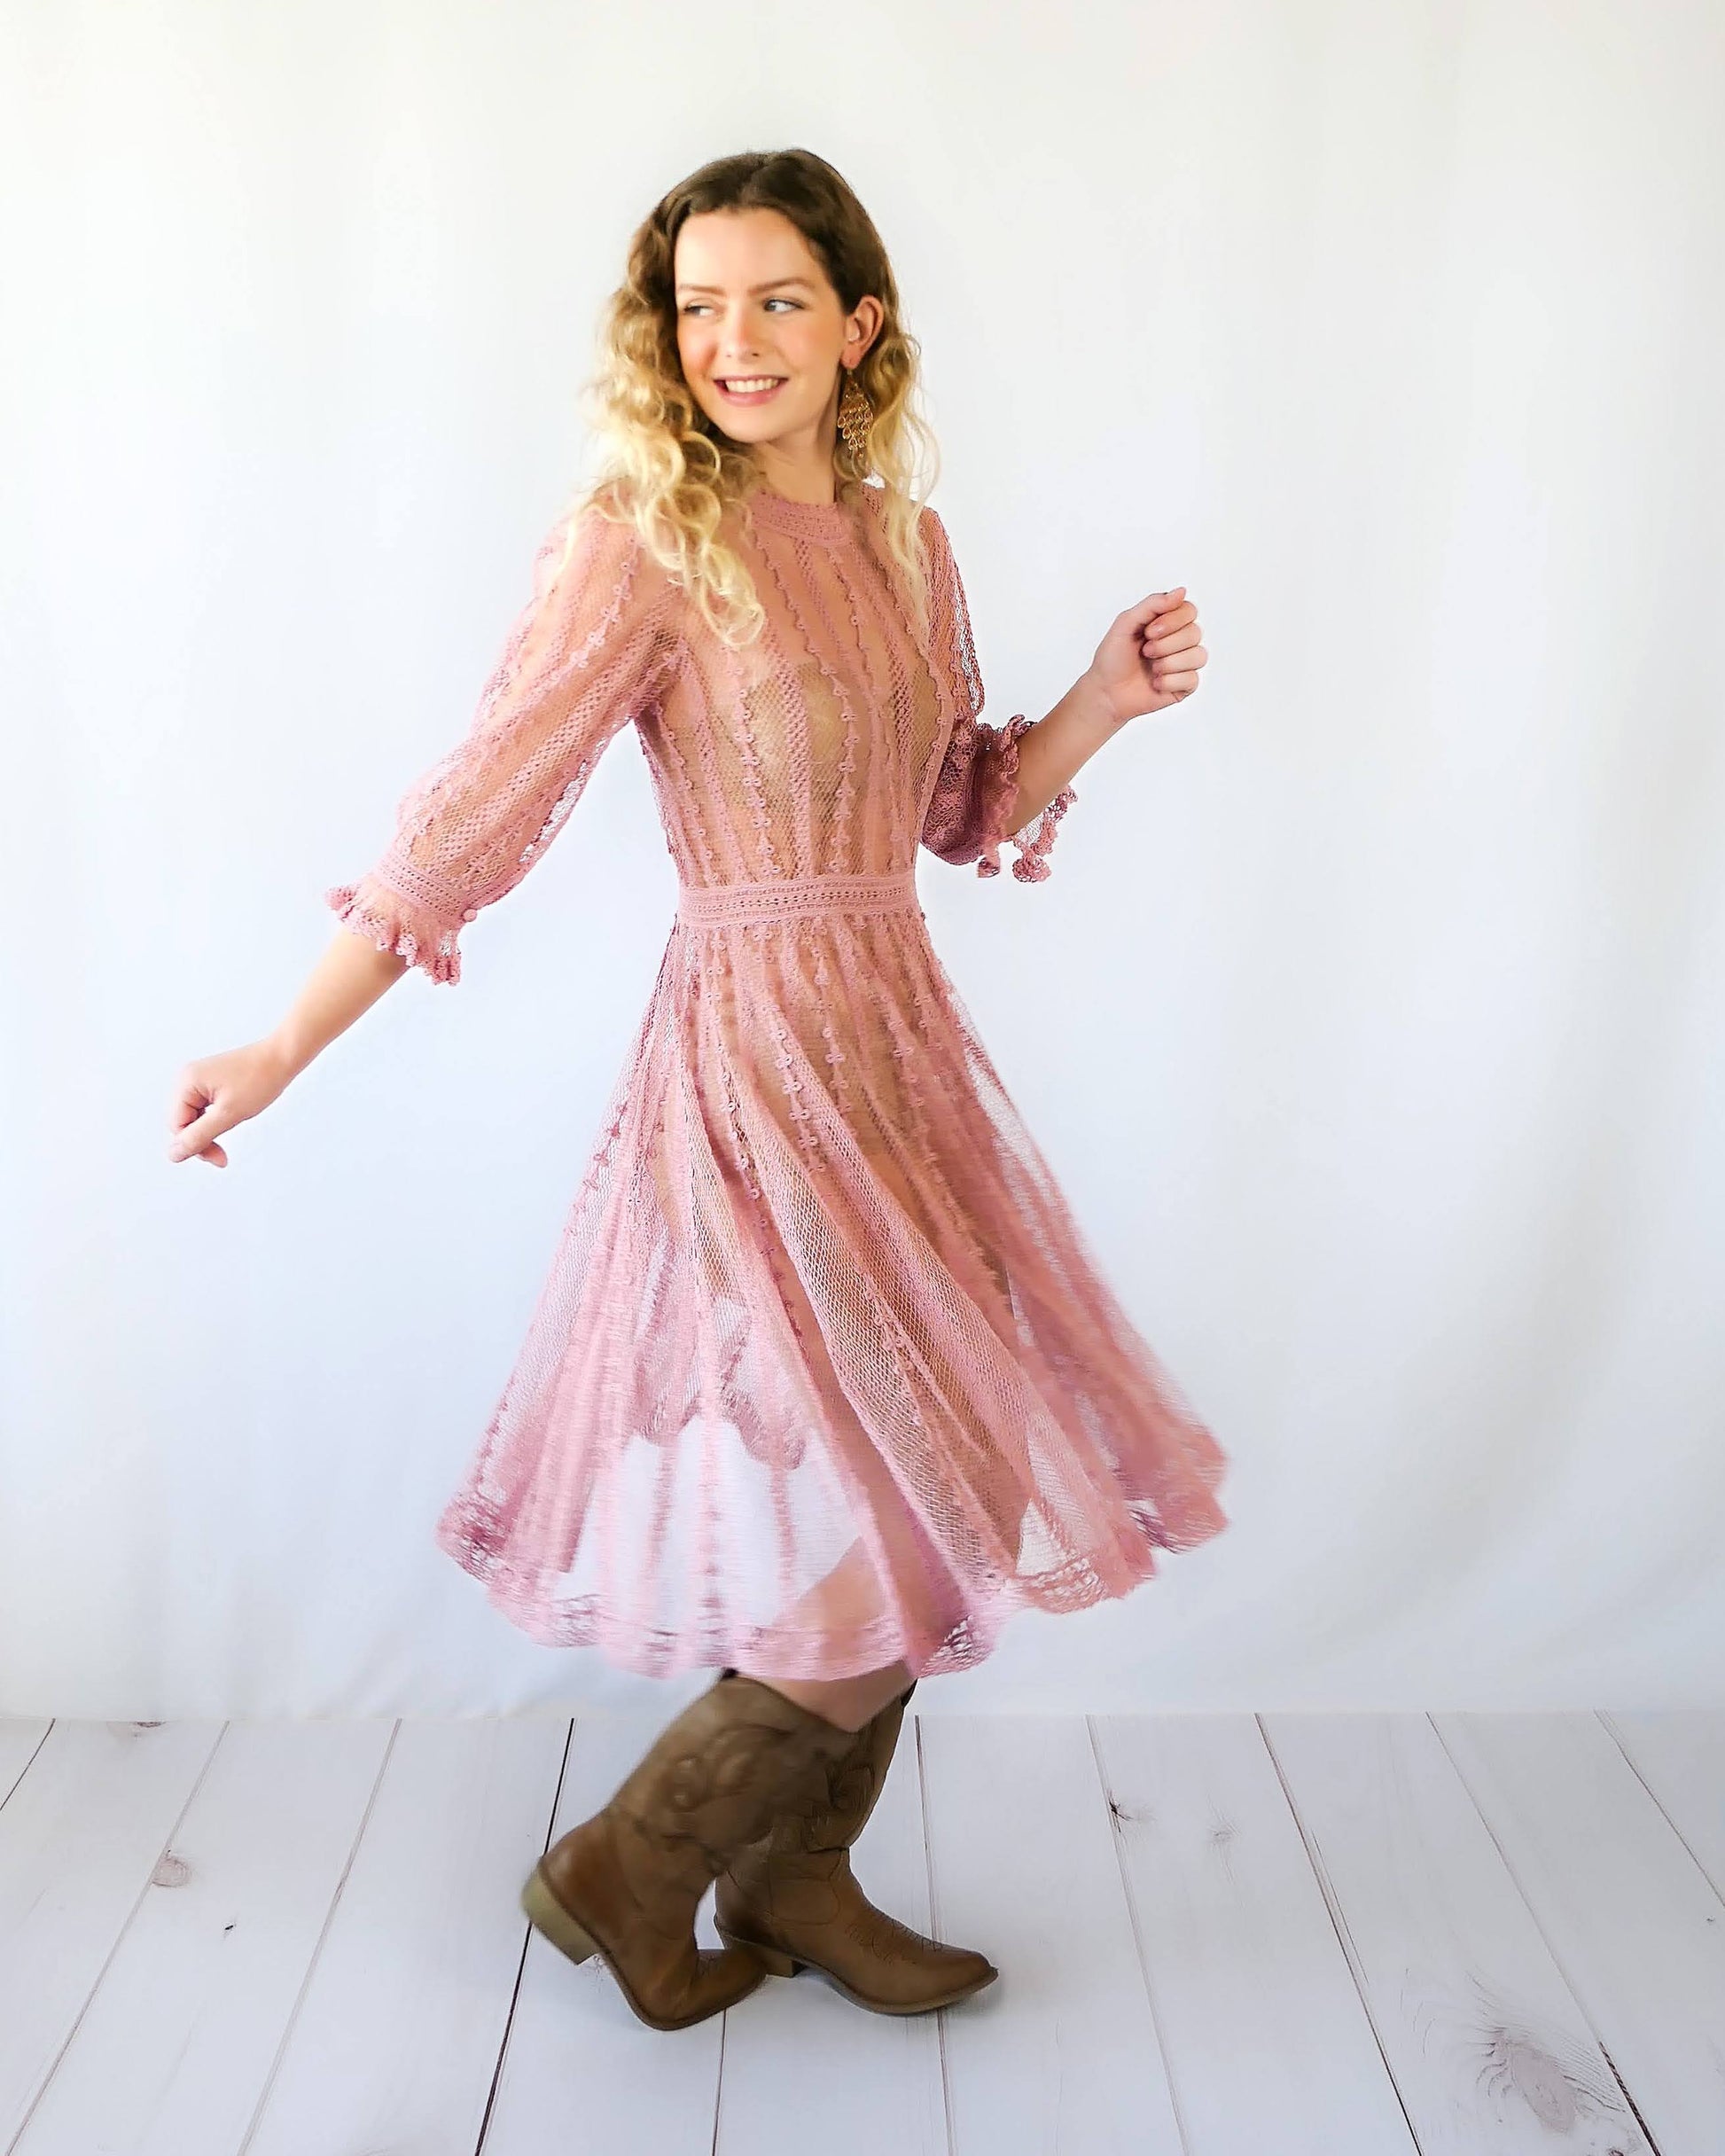 Picture of Lim's Vintage midi length crochet dress in muted rose color.  The model is twirling around.  Fitted waist, flares out towards the hem.  Ruffle at the bottom of the sleeves.  Made with fine cotton yarns to create a sheer look. 